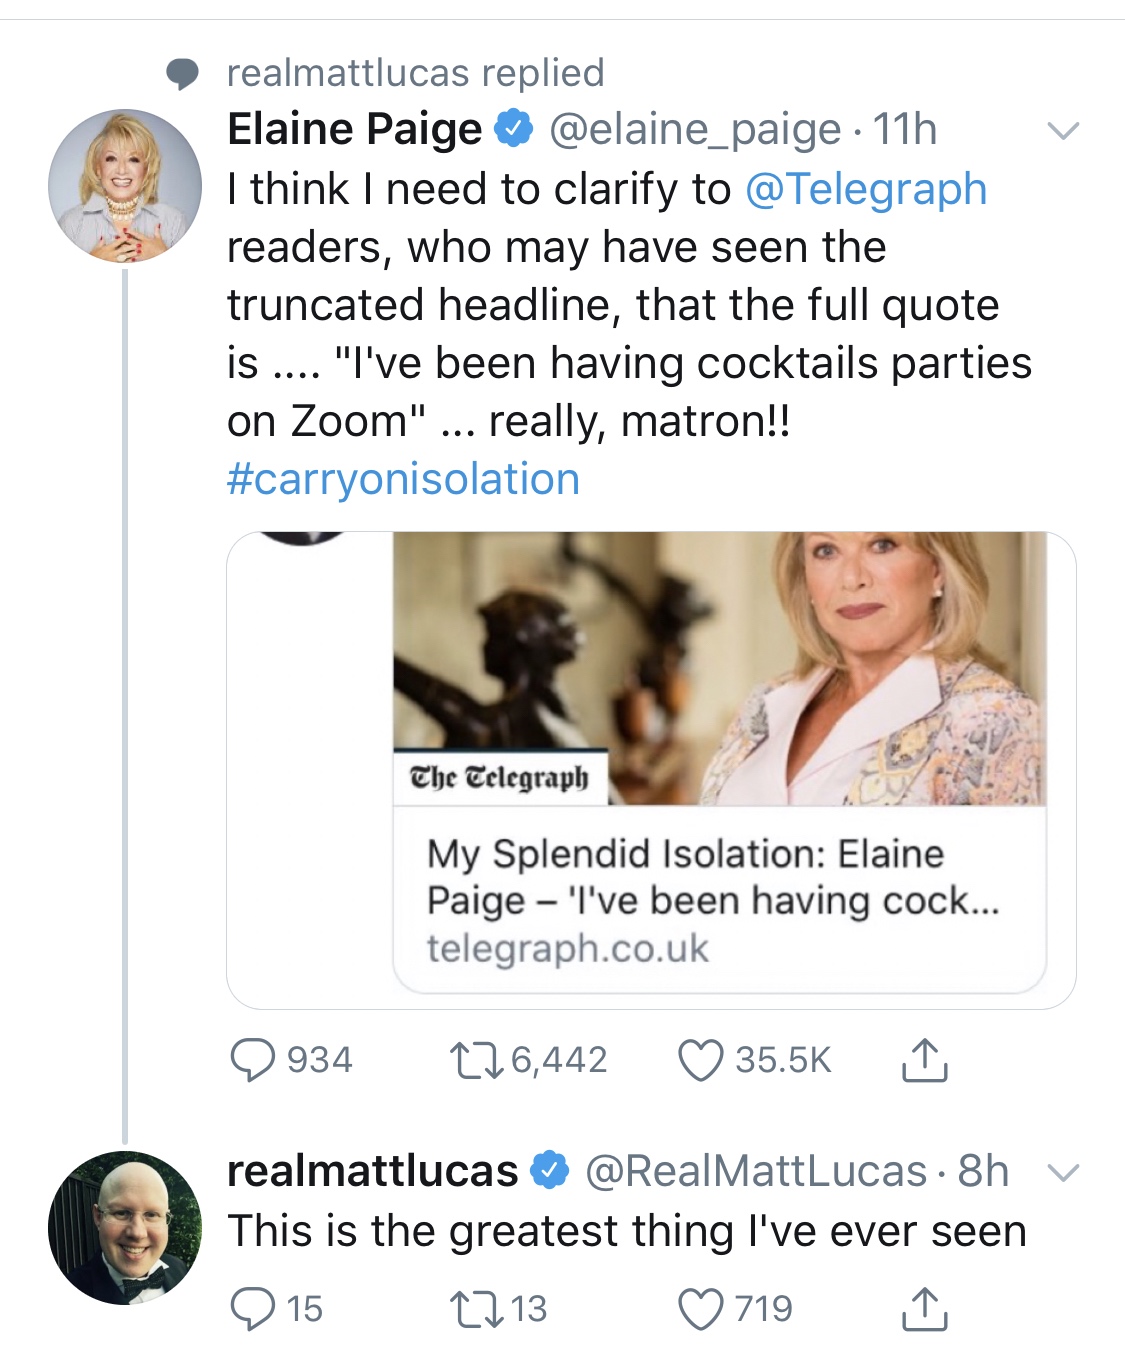 animal - realmattlucas replied Elaine Paige 11h I think I need to clarify to readers, who may have seen the truncated headline, that the full quote is .... "I've been having cocktails parties on Zoom" ... really, matron!! The Telegraph My Splendid Isolati